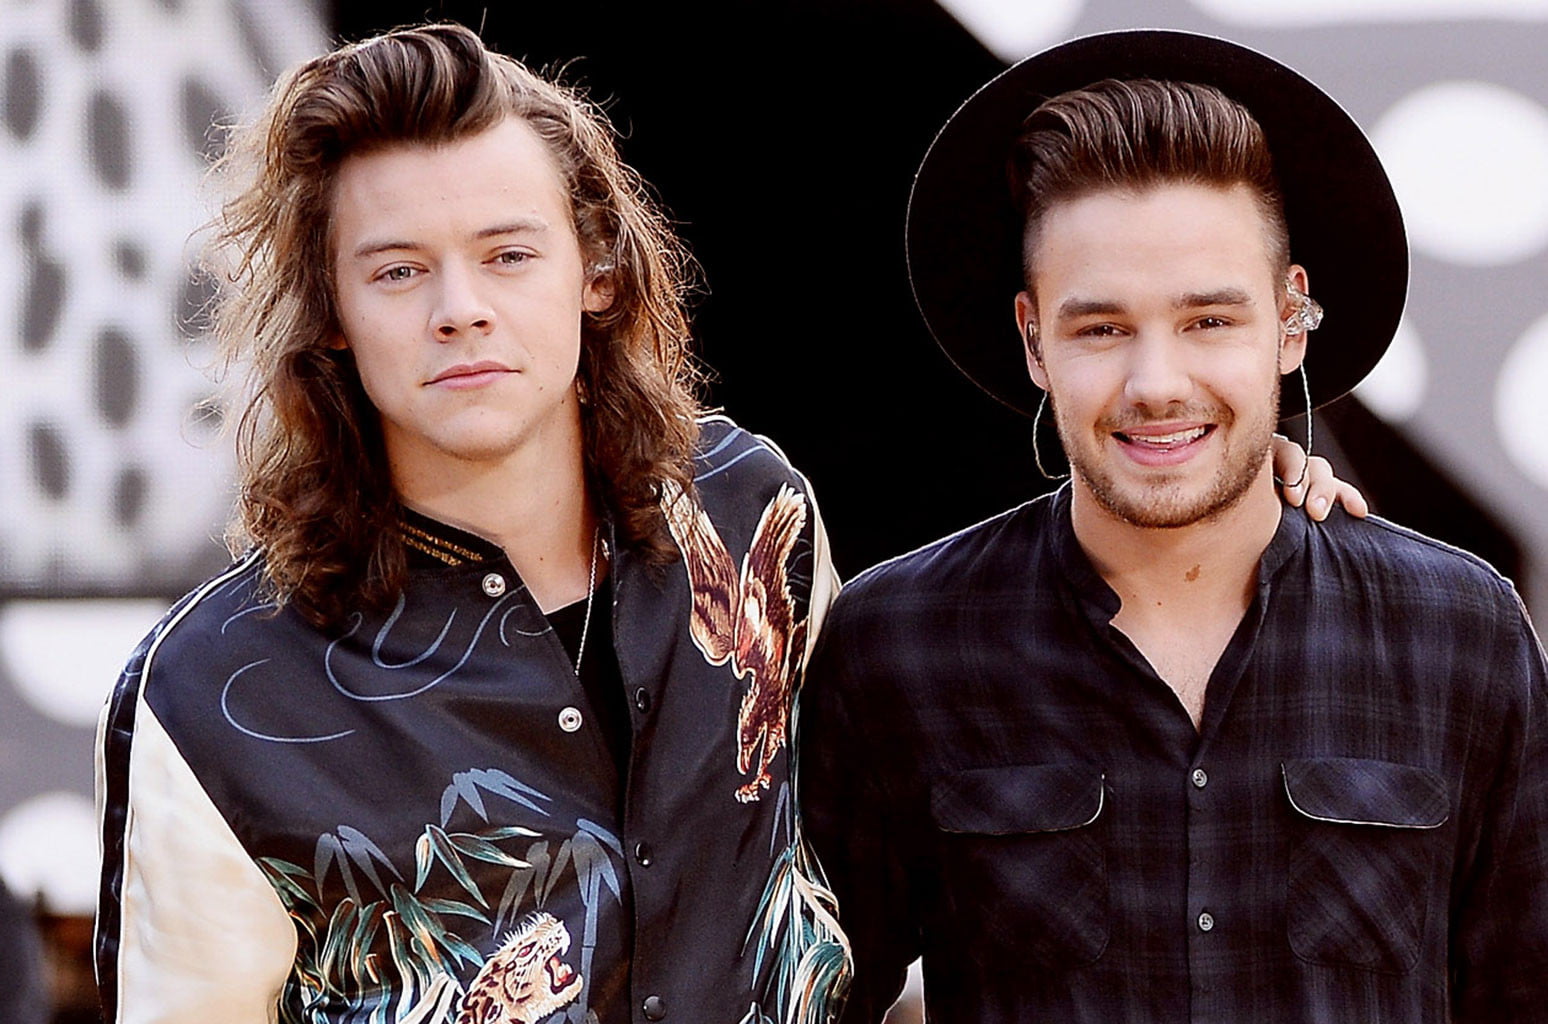 Liam Payne Shares His Opinion On Former One Direction Bandmate Harry Styles Rocking A Dress On The Cover Of Vogue